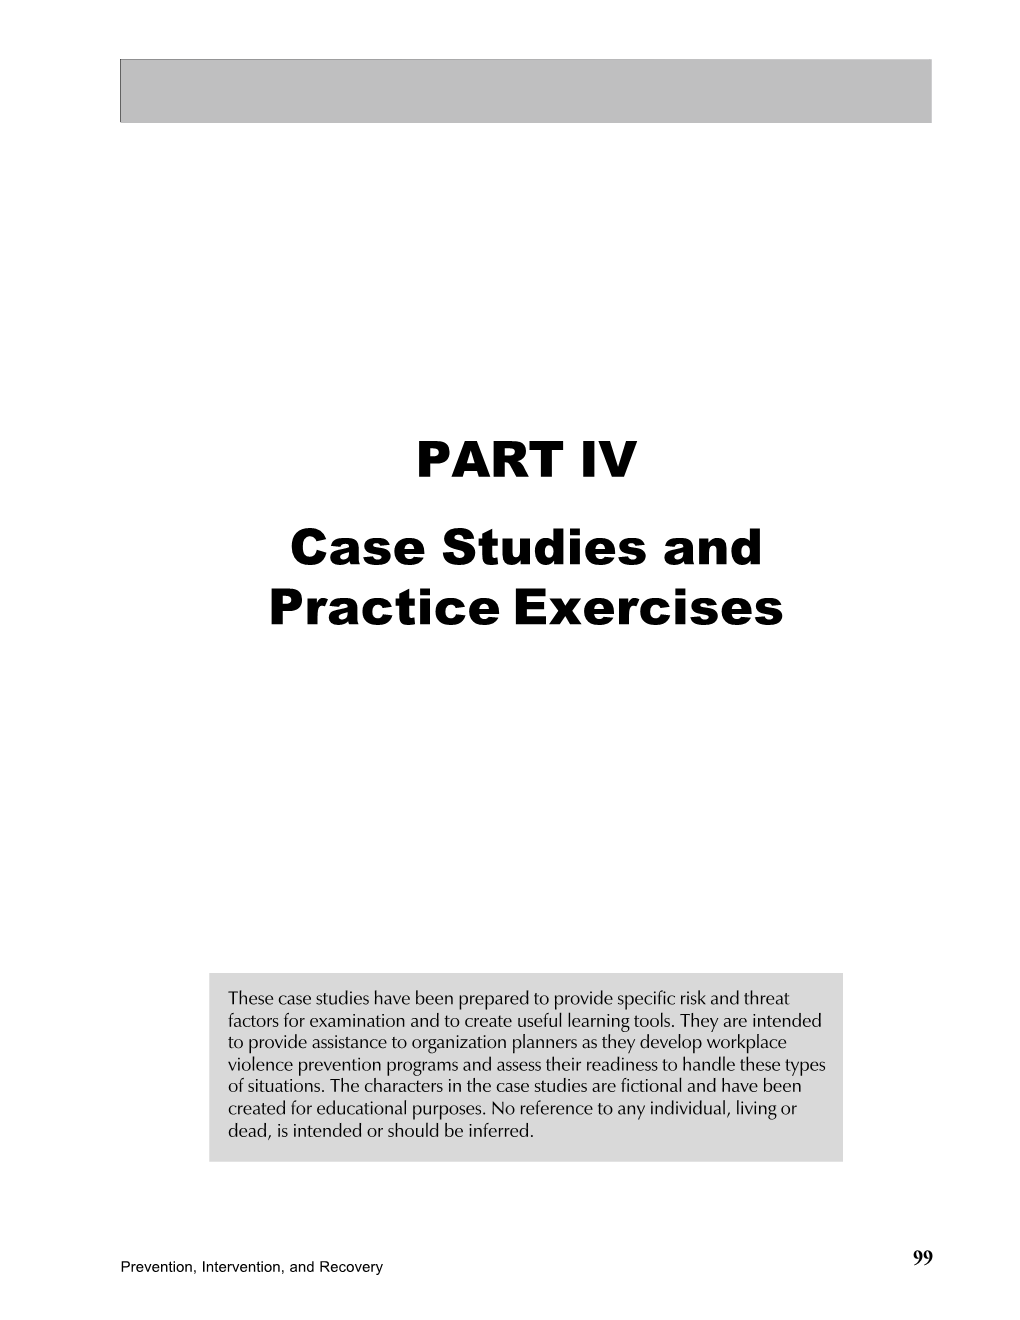 PART IV Case Studies and Practice Exercises